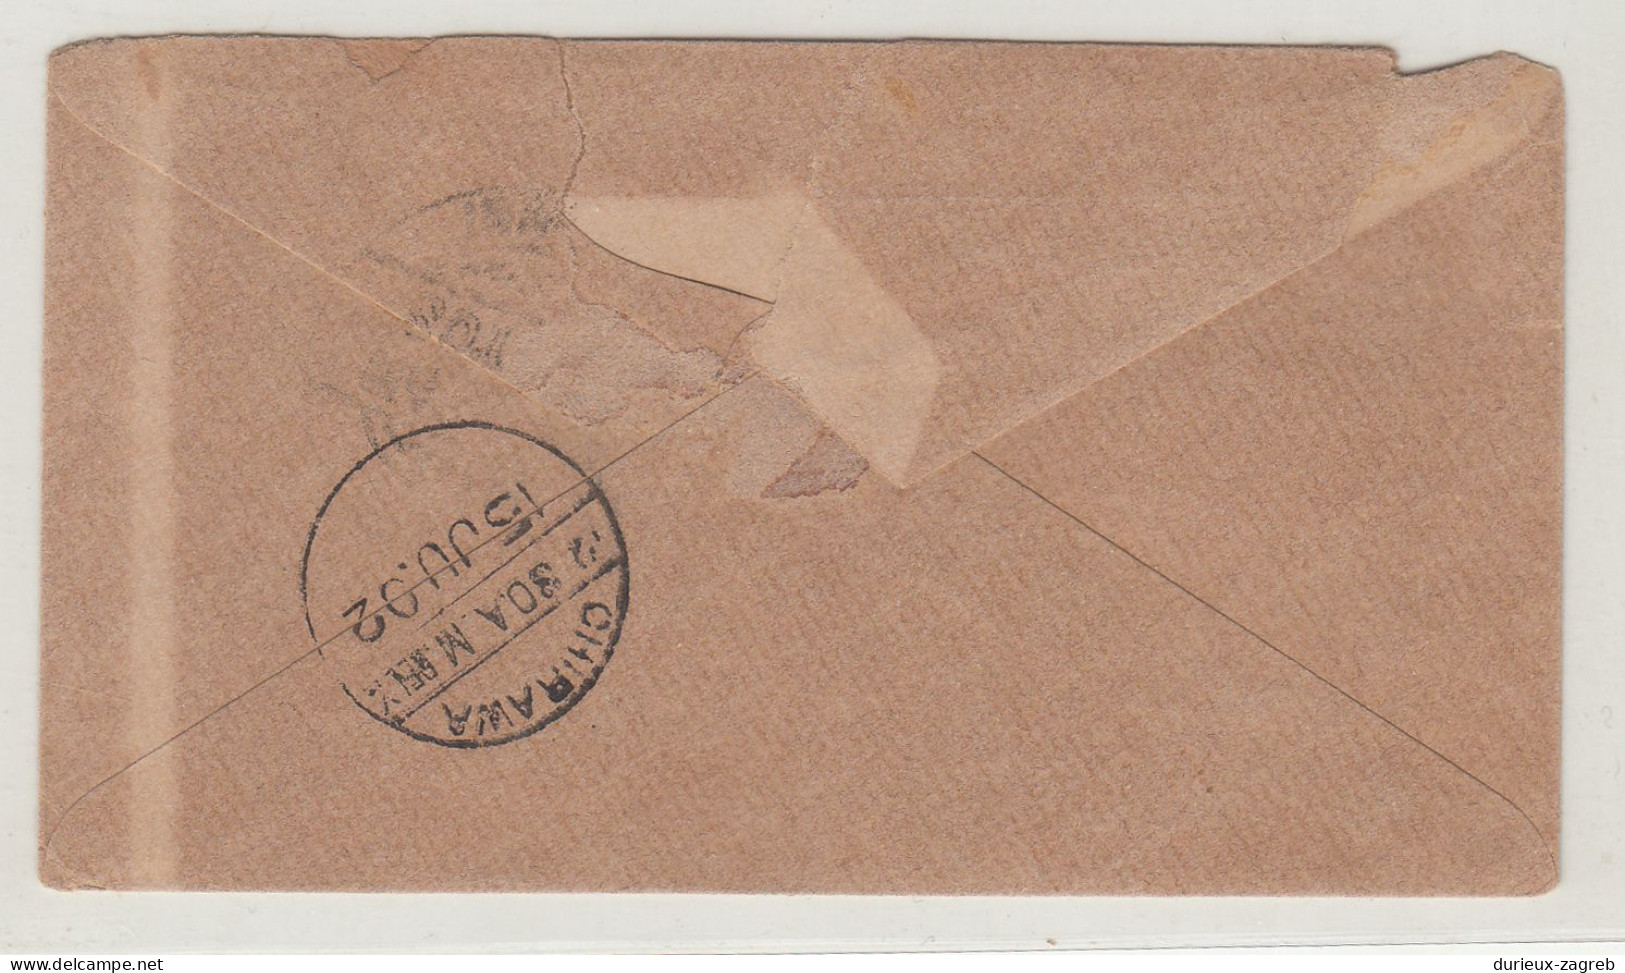 India QV Postal Stationery Small Letter Cover Posted 1902 Bhiwani? To Chirawa B240401 - 1882-1901 Empire